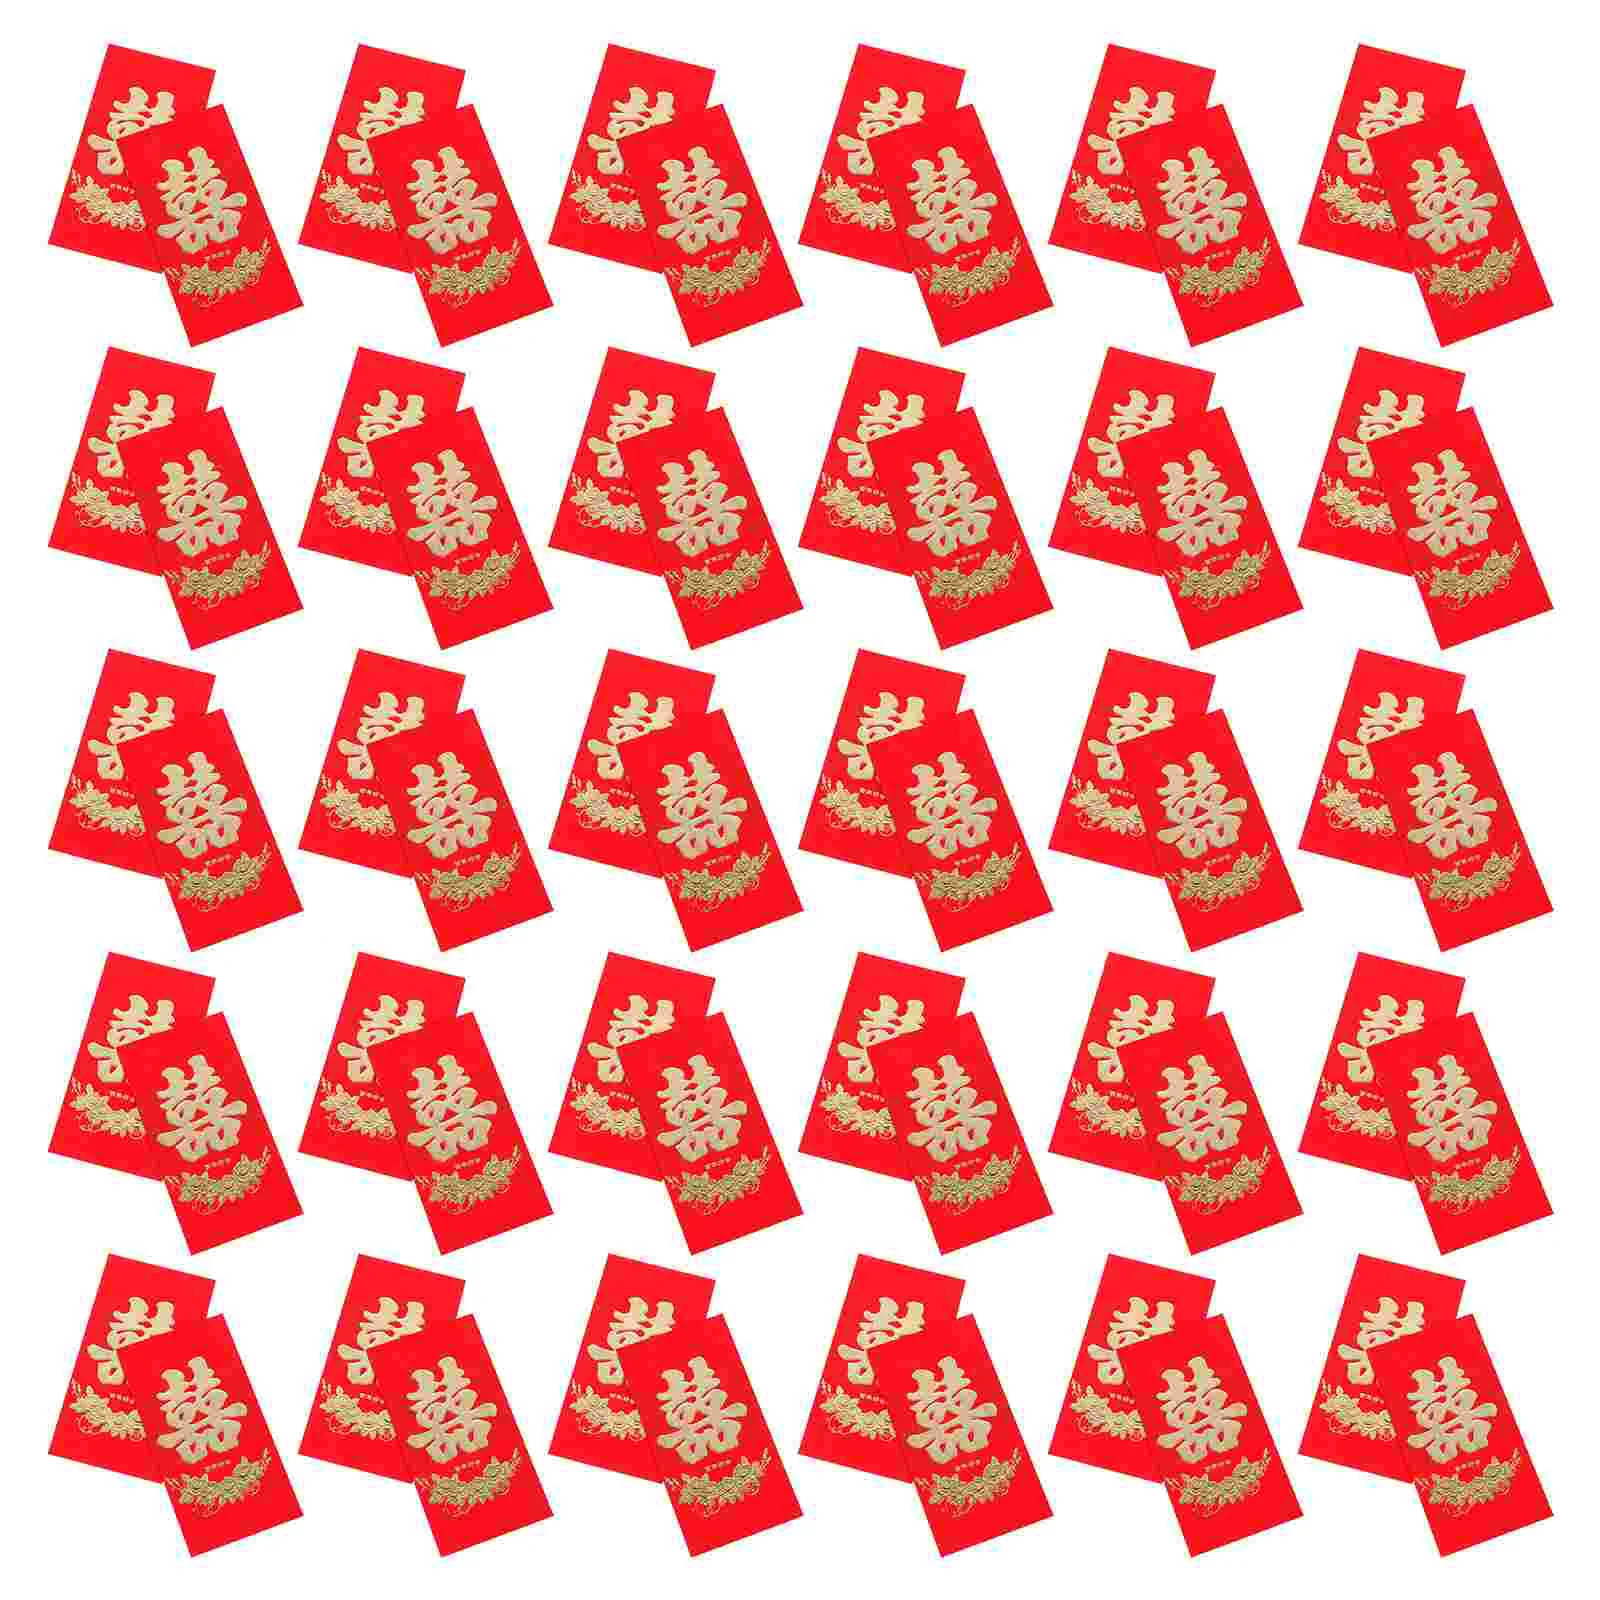 

60 Pcs Long Double Happiness Red Envelope The Gift New Year Envelopes Wedding Chinese Style Money Pocket Paper Favors